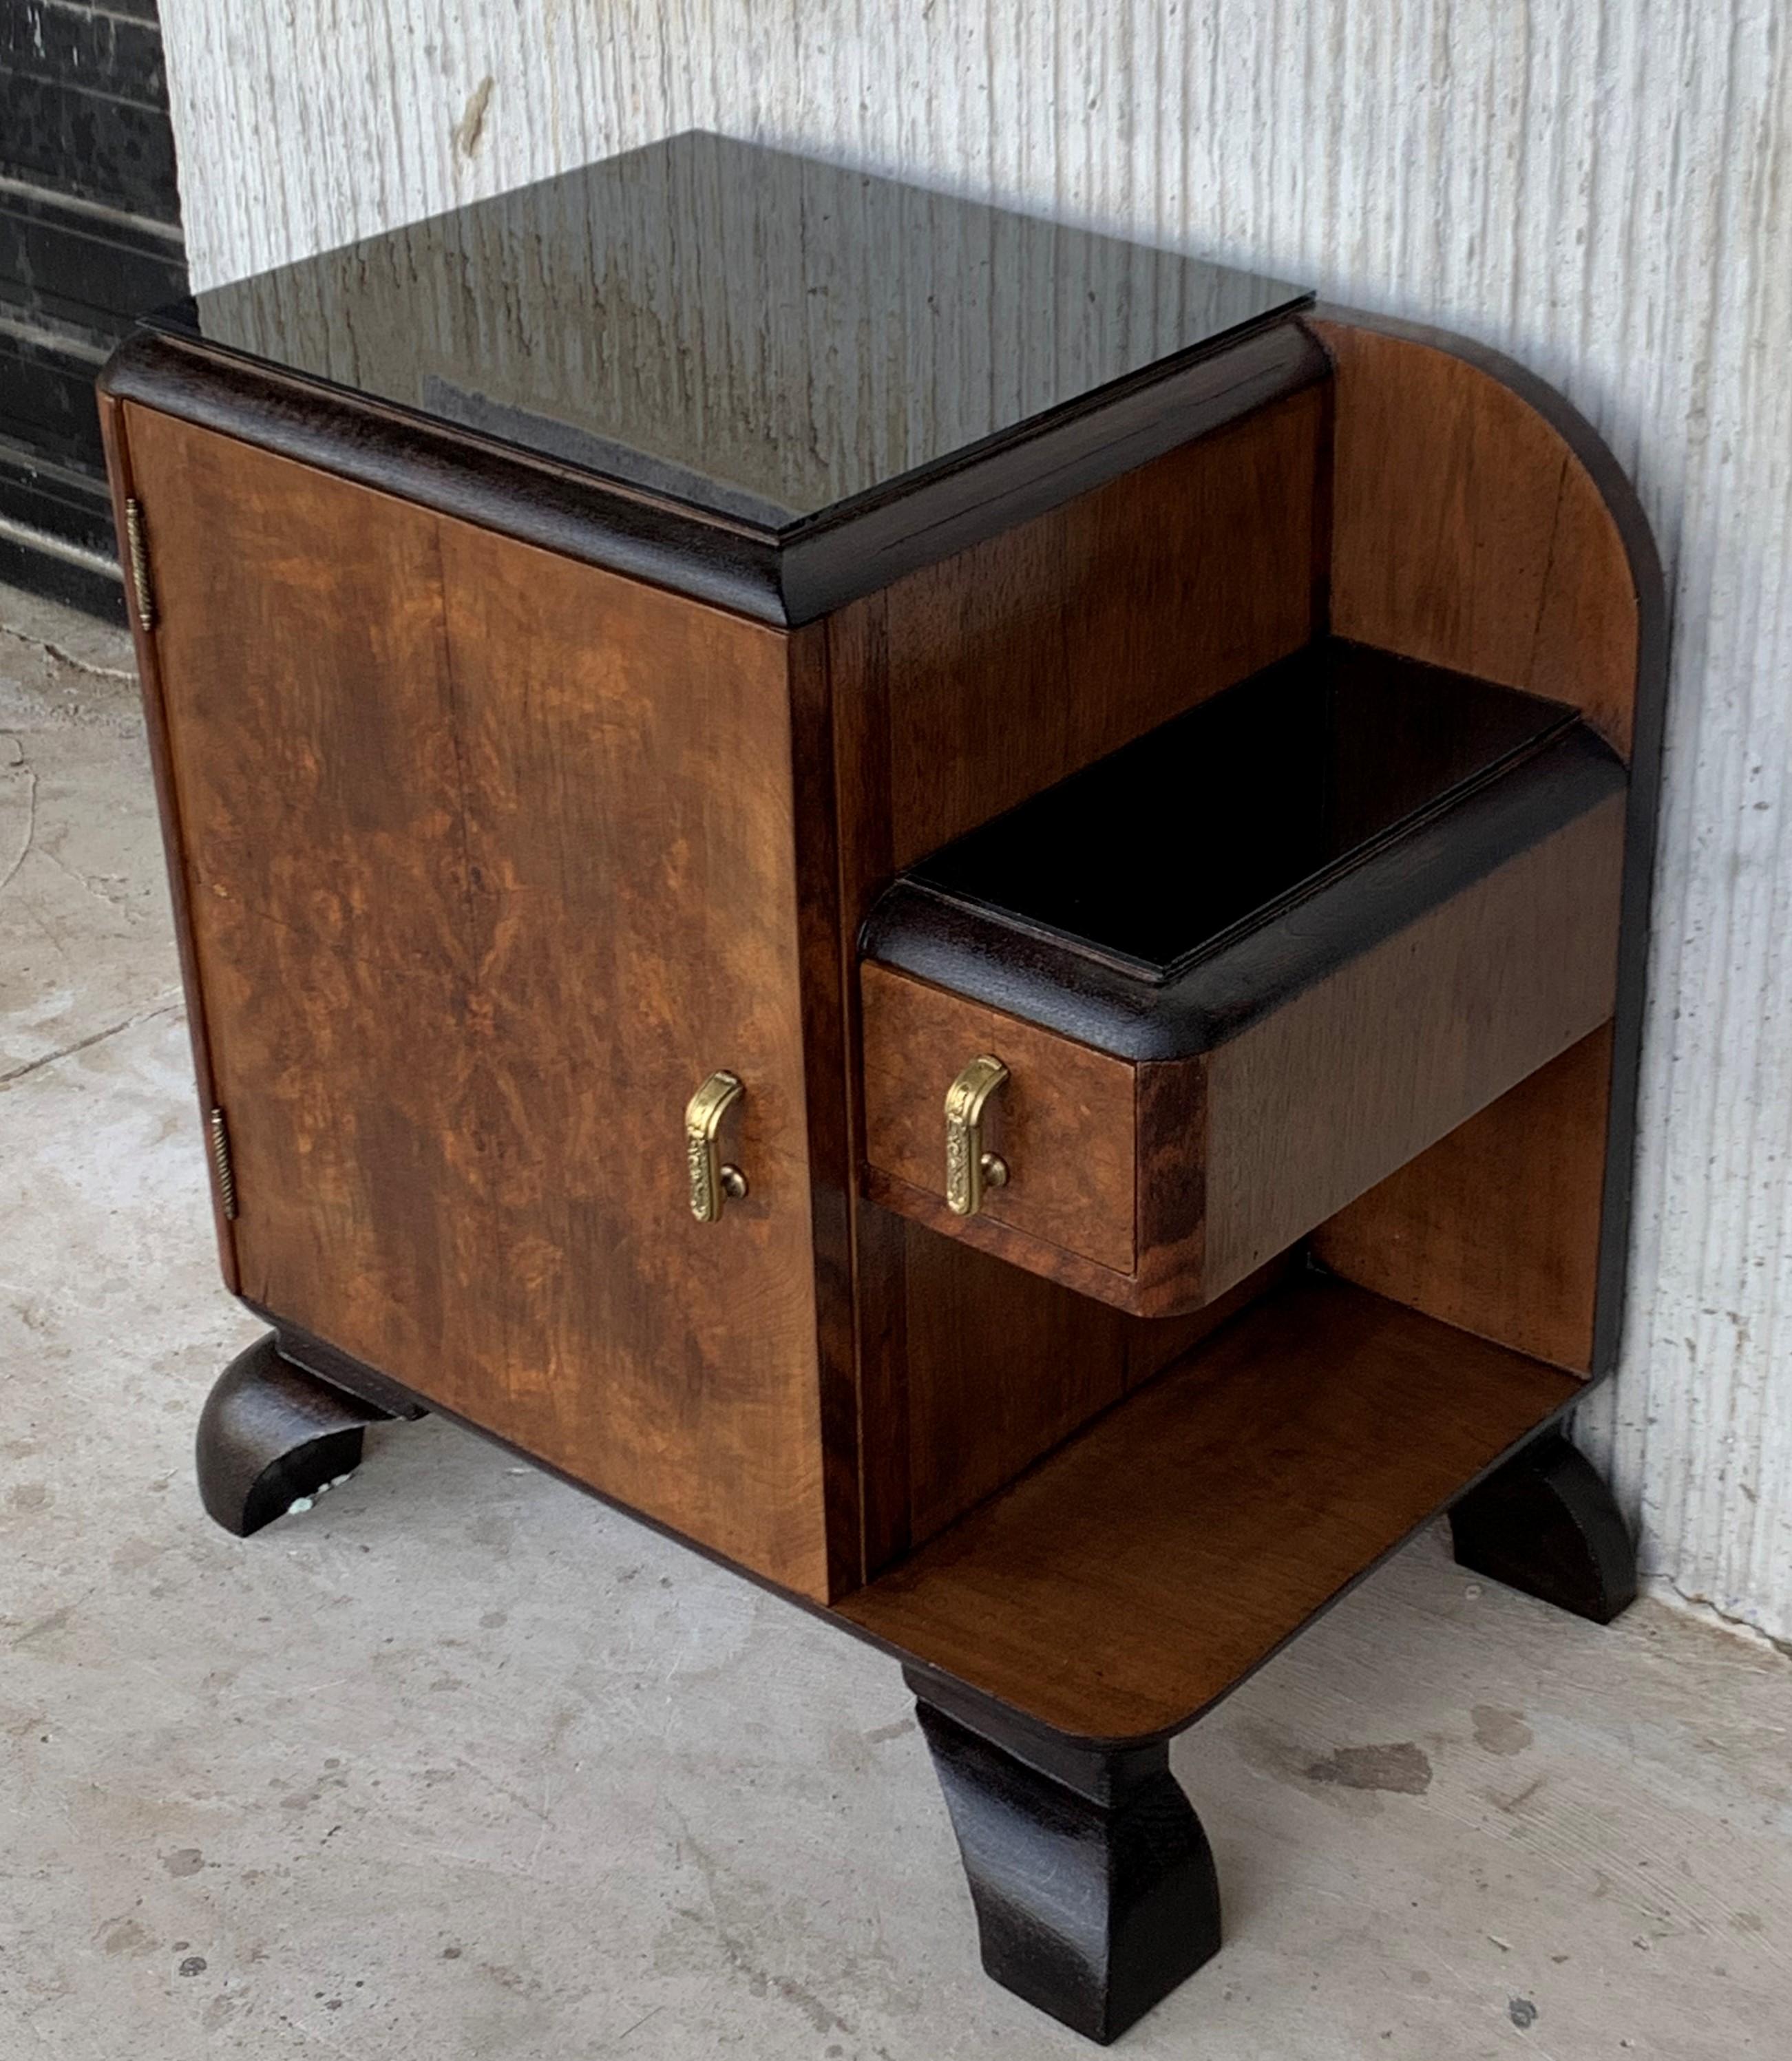 Wood Pair of Midcentury Front Nightstands with Original Hardware and Ebonized Base